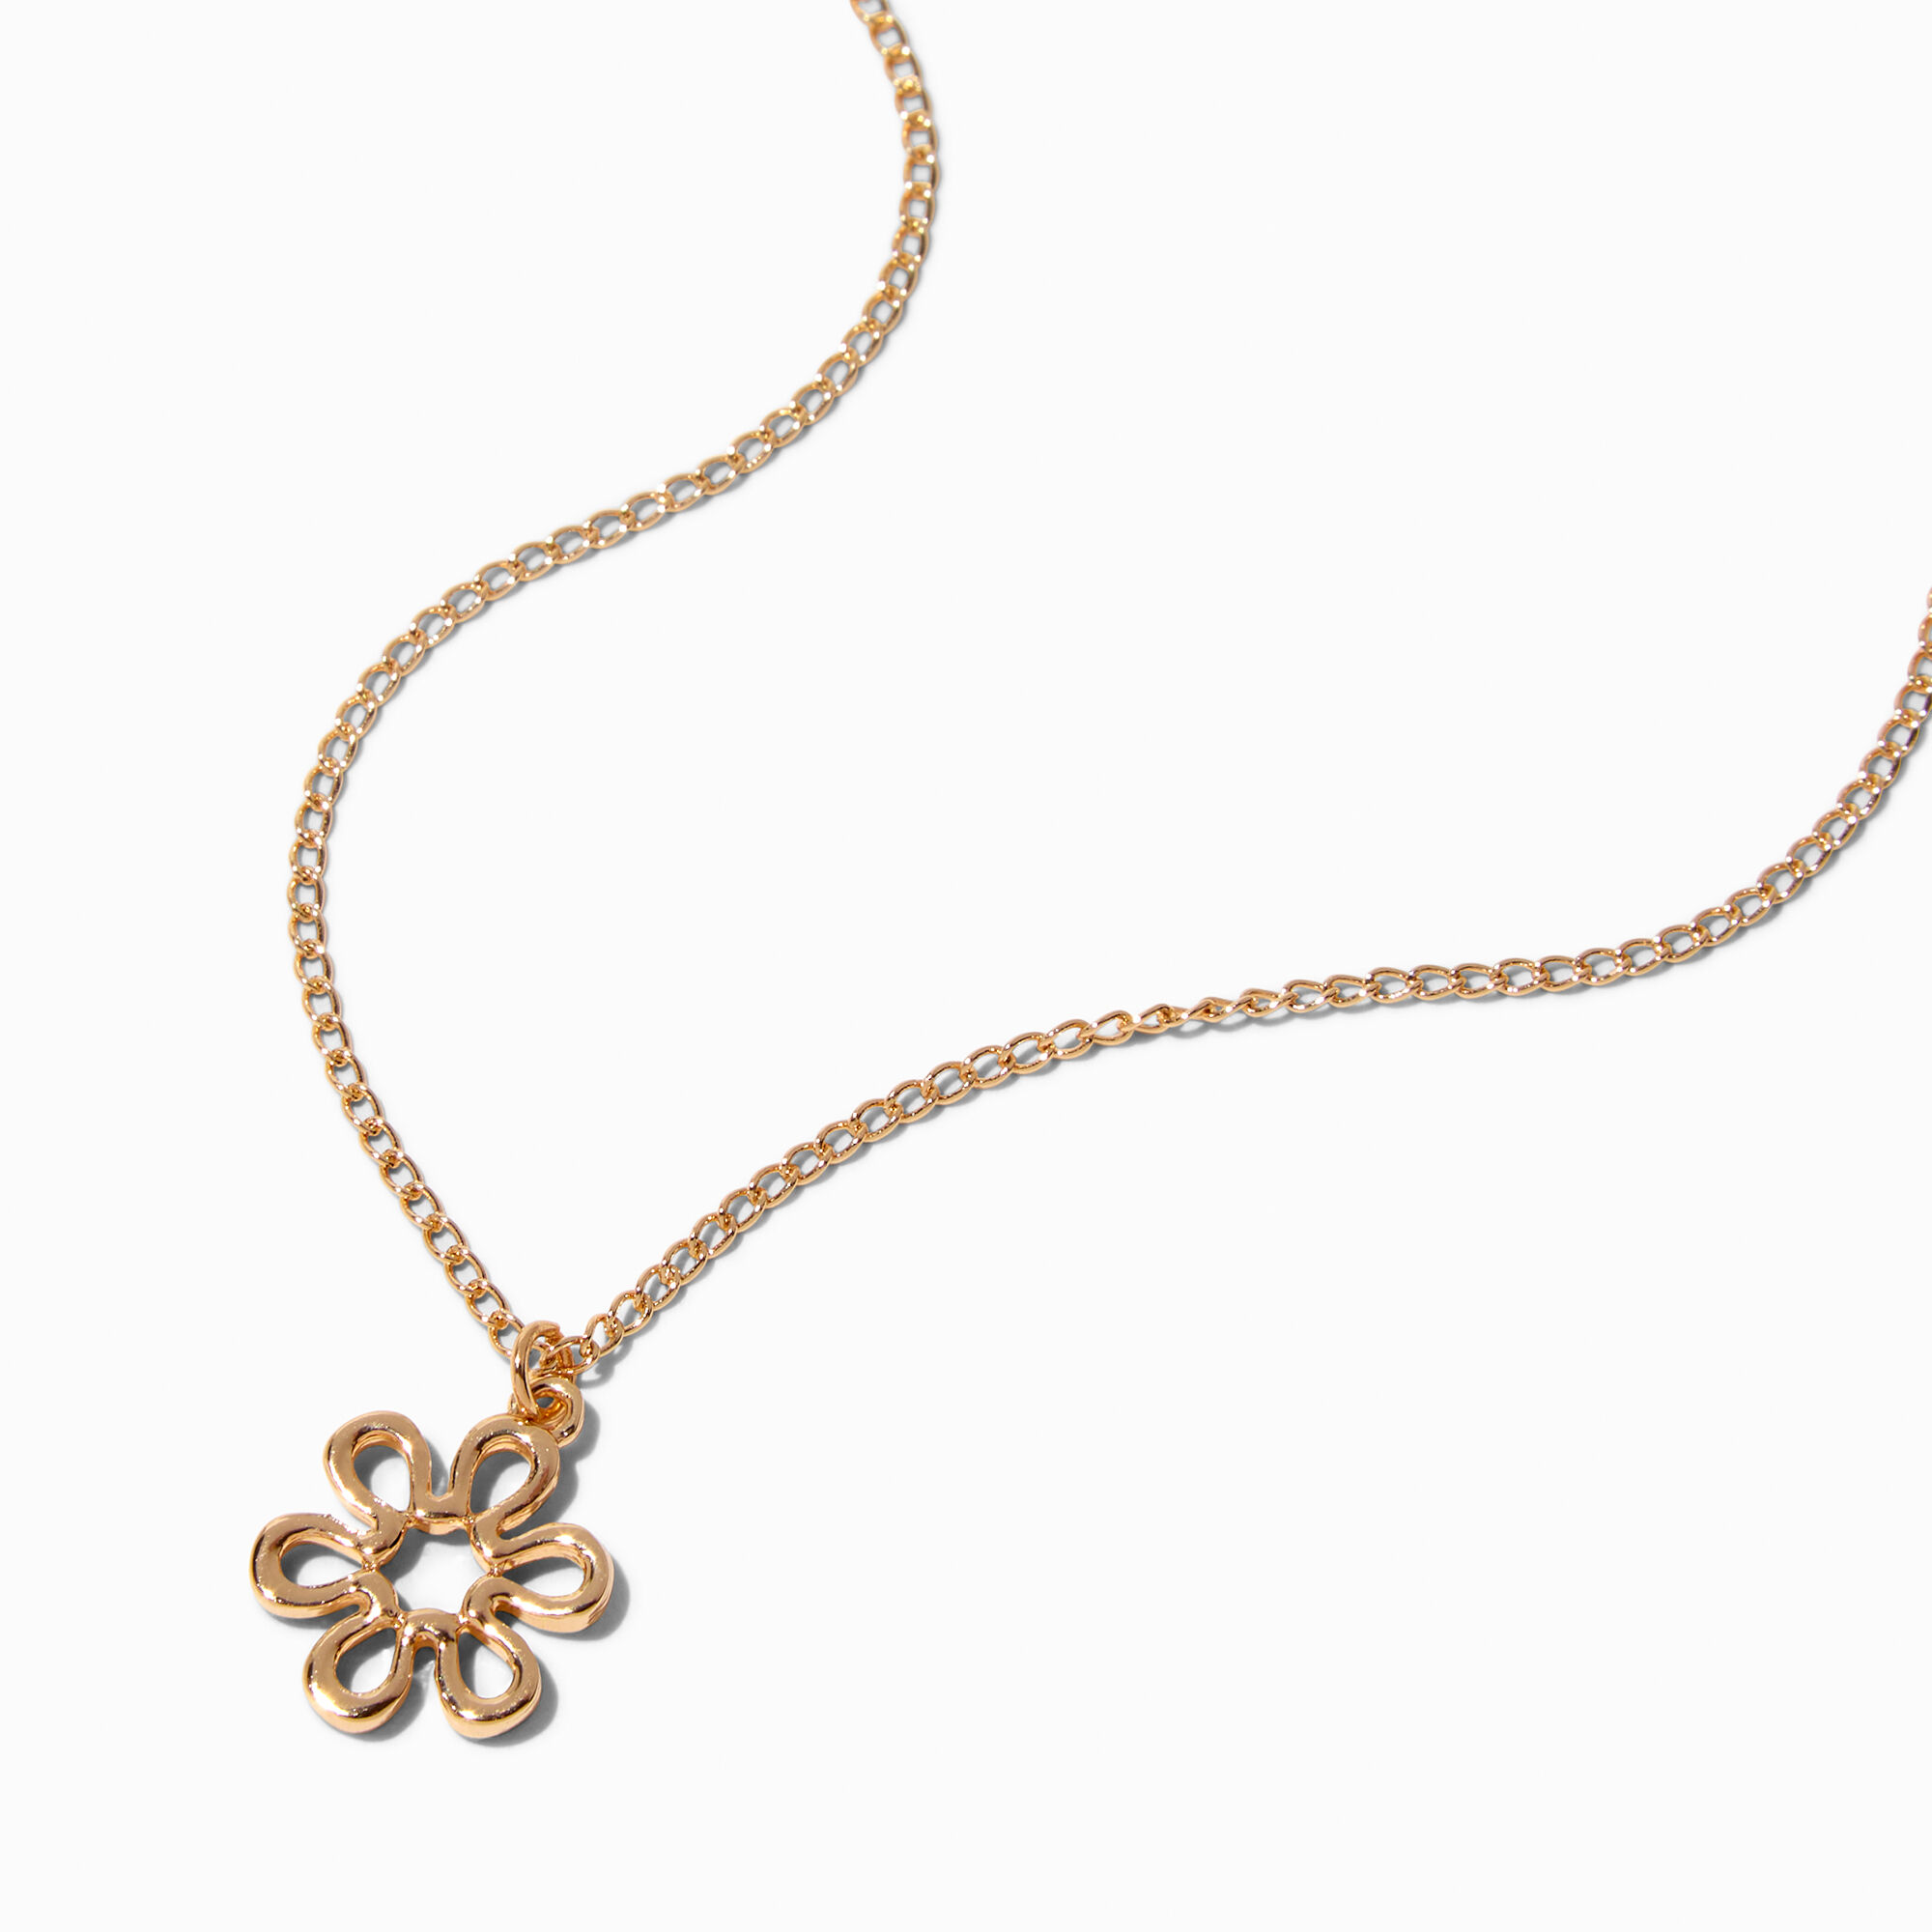 View Claires Recycled Jewelry Tone Daisy Outline Pendant Necklace Gold information